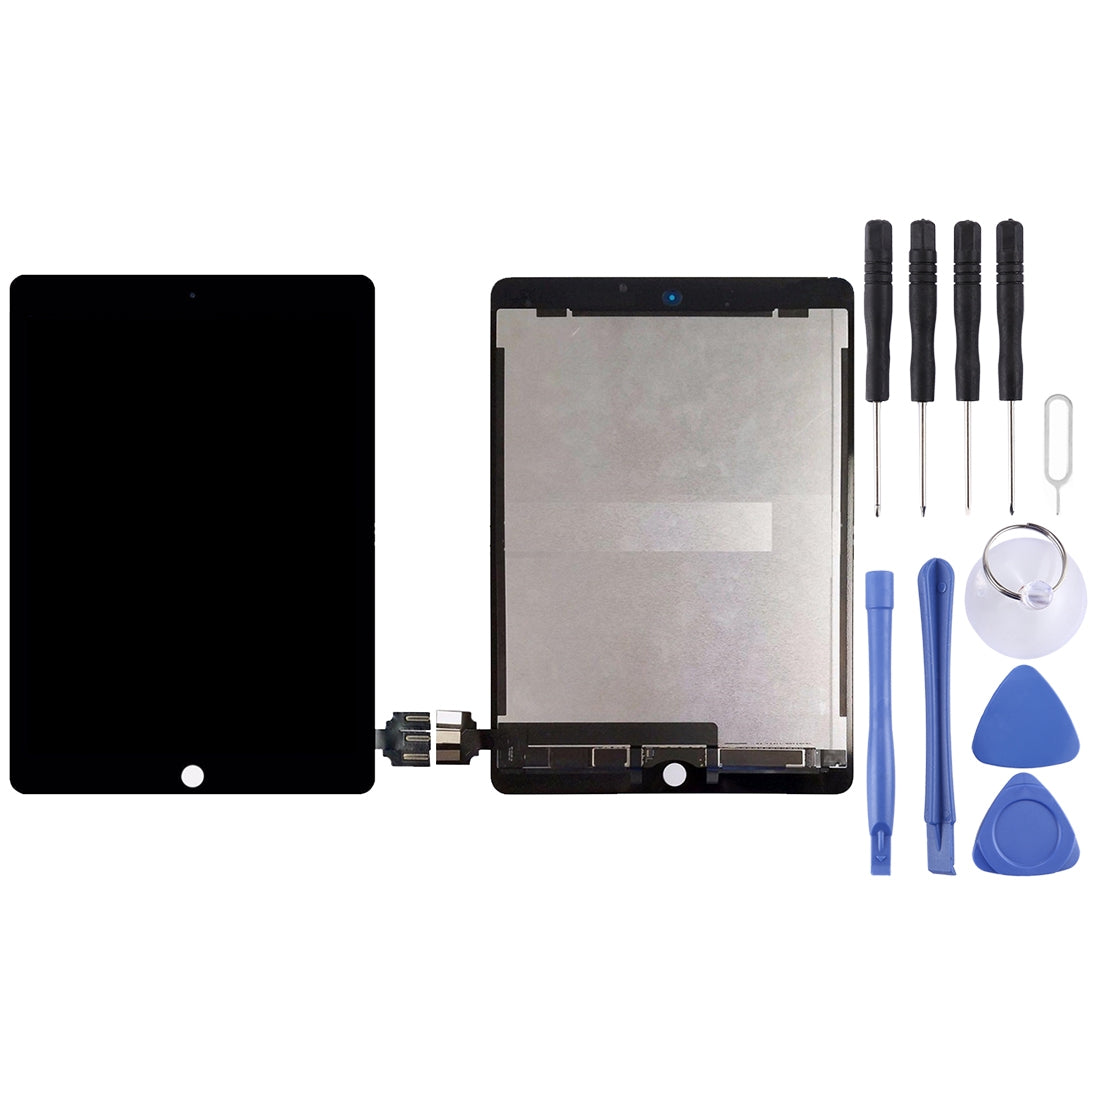 LCD Screen + Touch Digitizer Apple iPad Pro 9.7 A1673 A1674 A1675 Black